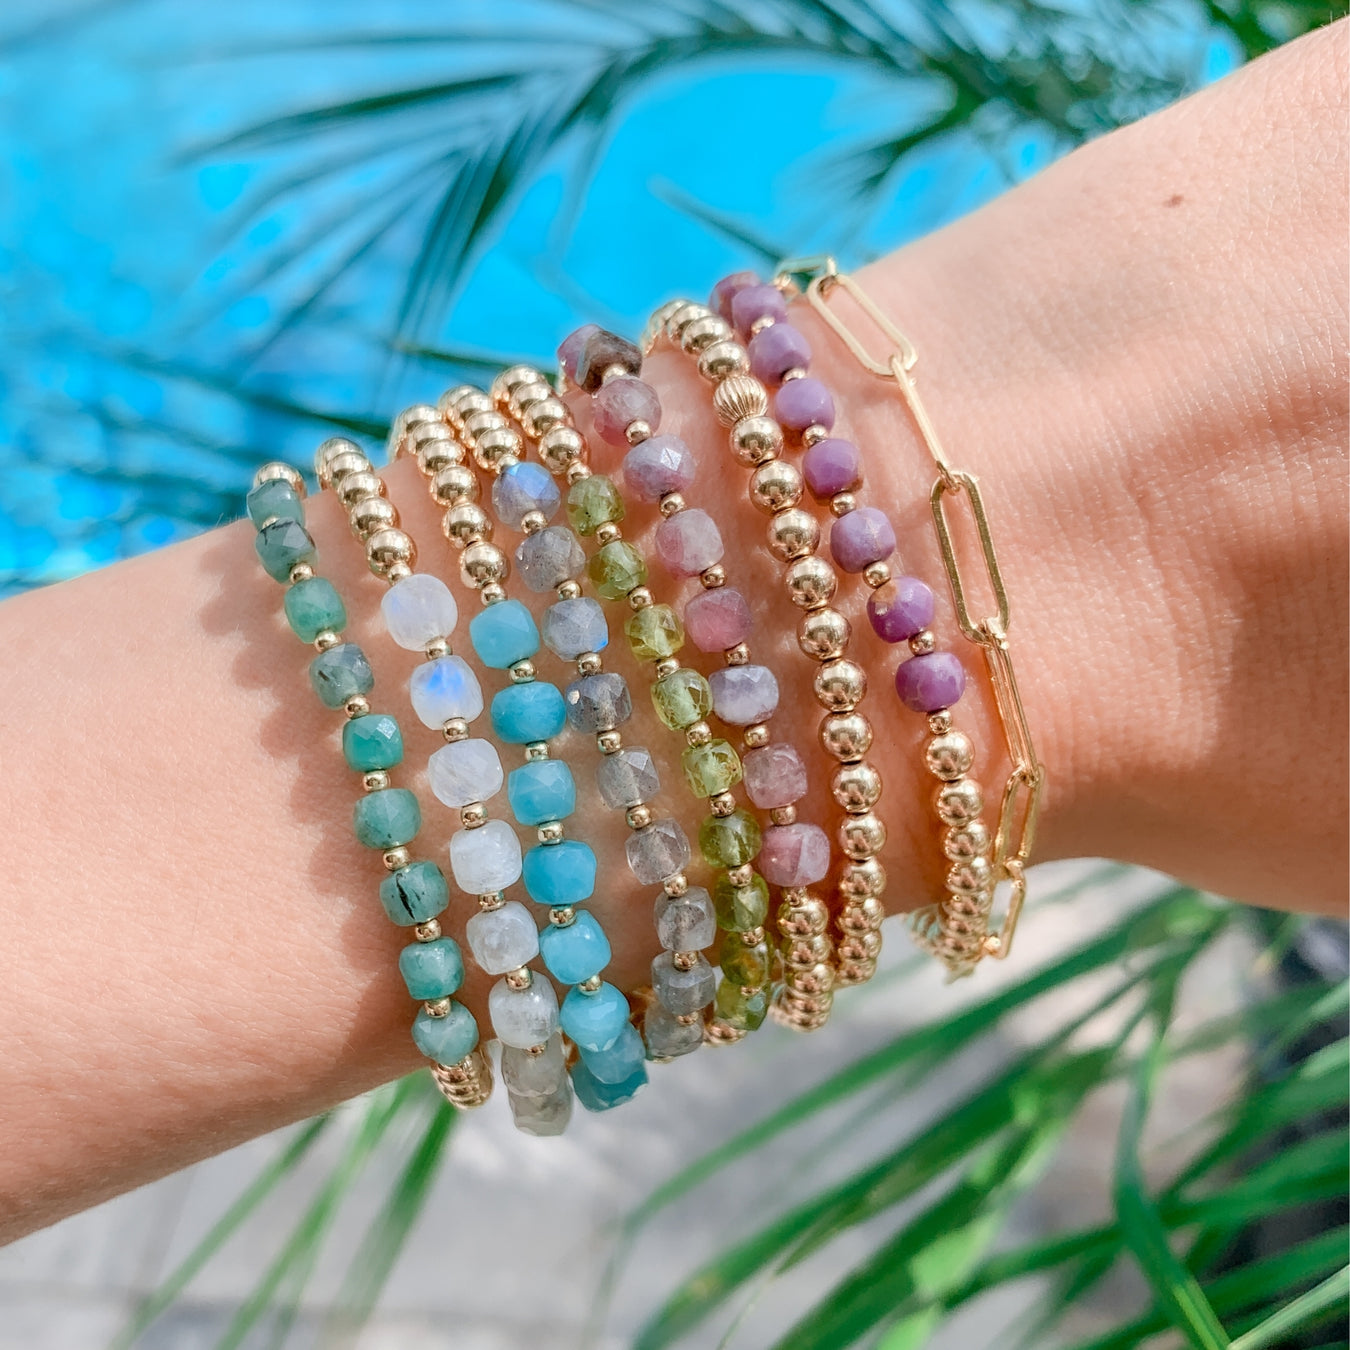 Gold Beaded Bracelet Stack Set on wrist with faceted gemstones closeup with tropical background - Blooming Lotus Jewelry